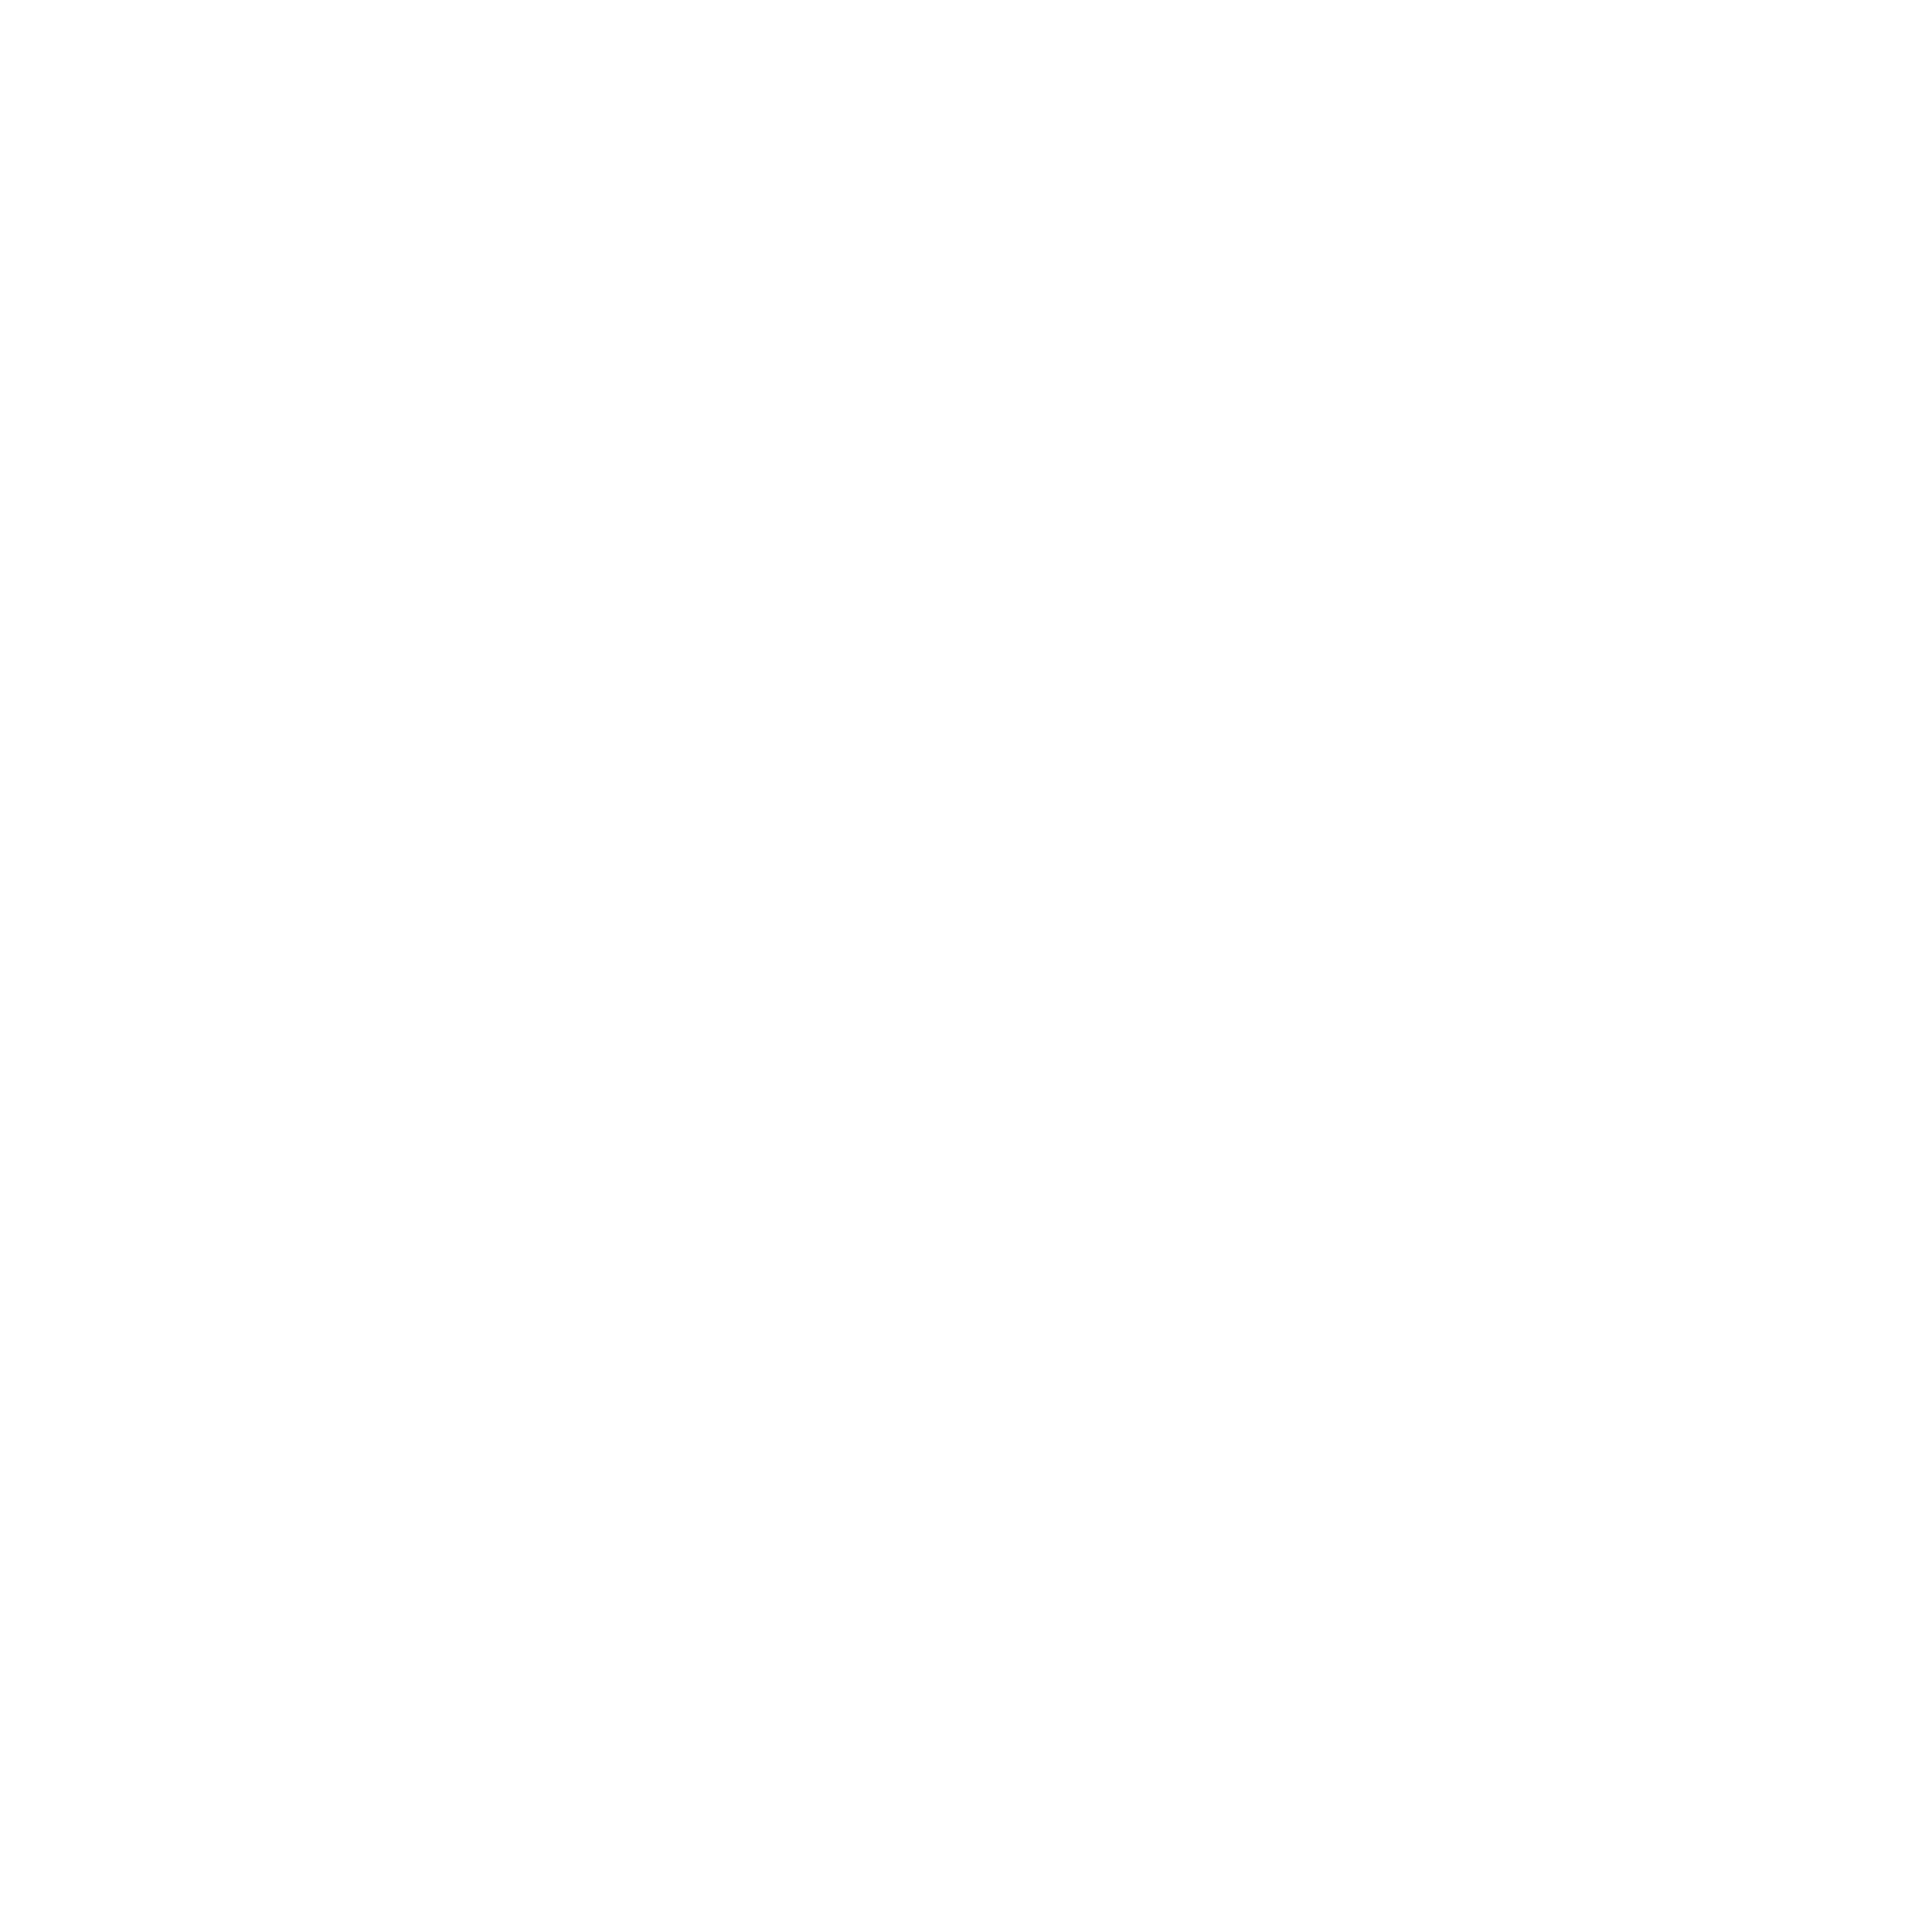 Coaches can earn ICF accredited CCEUs (continuing coach education units) by completing the collective leadership assessment certification. 